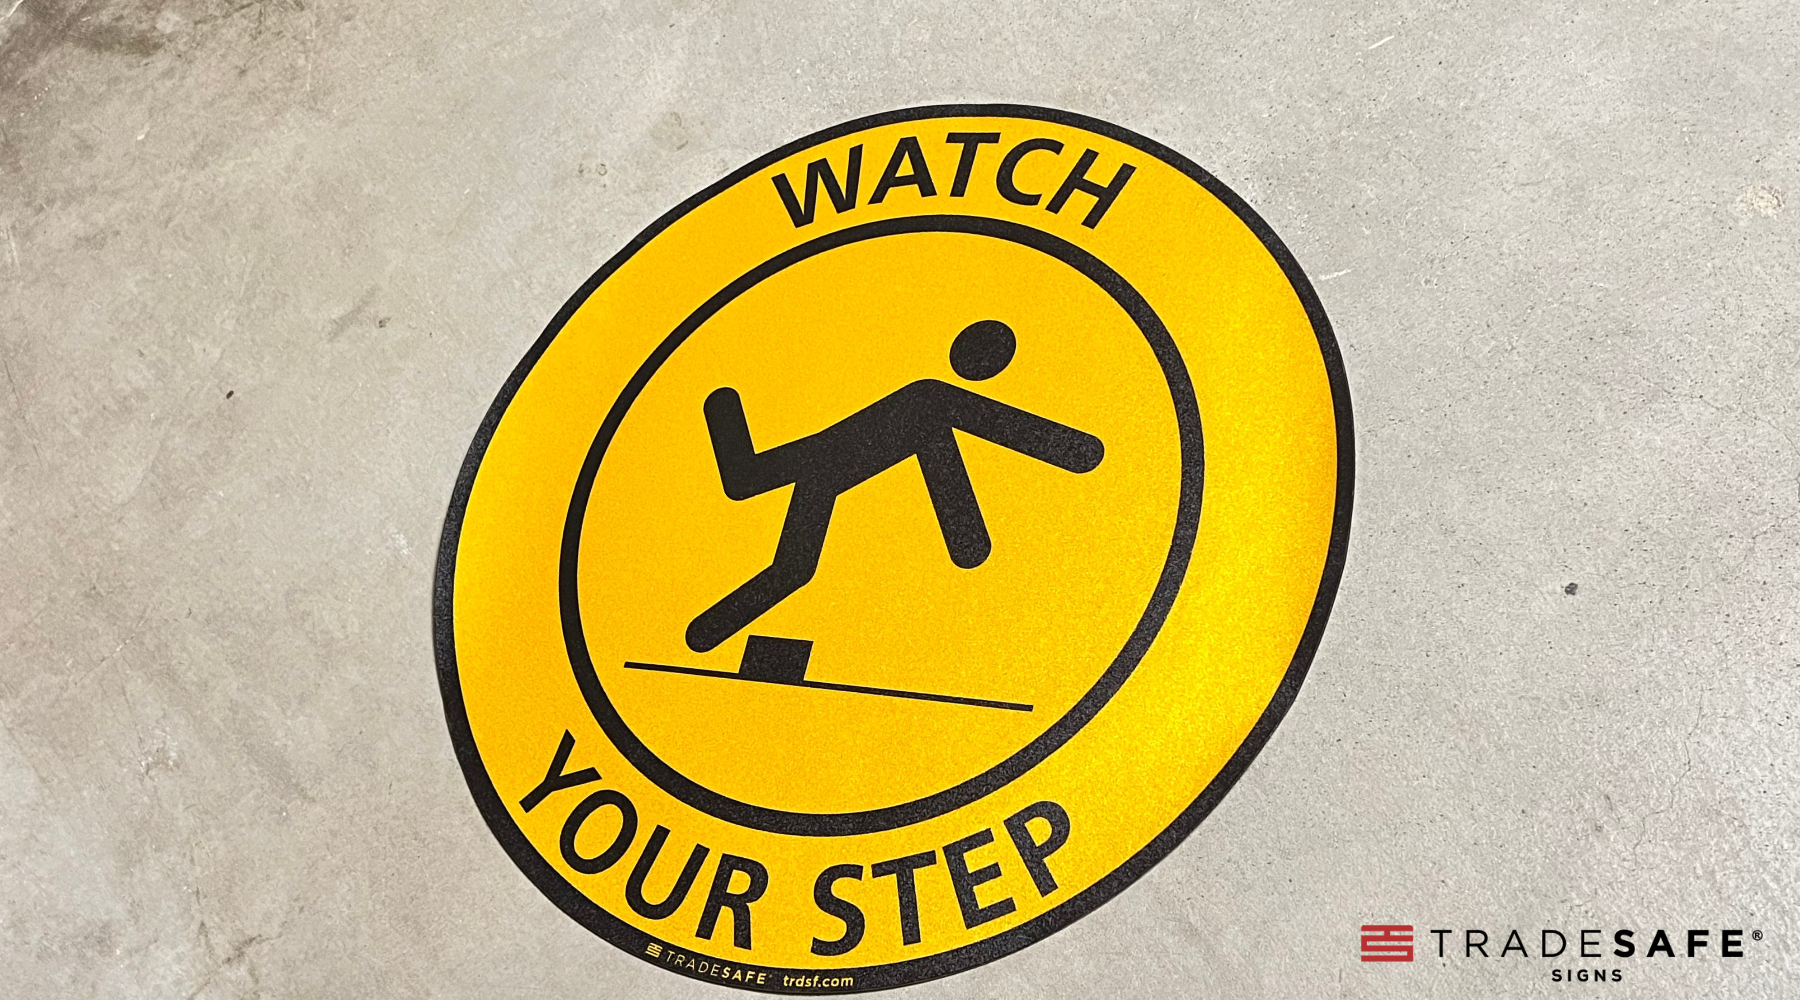 Safety Tips for Stairways to Prevent Slips, Trips and Falls